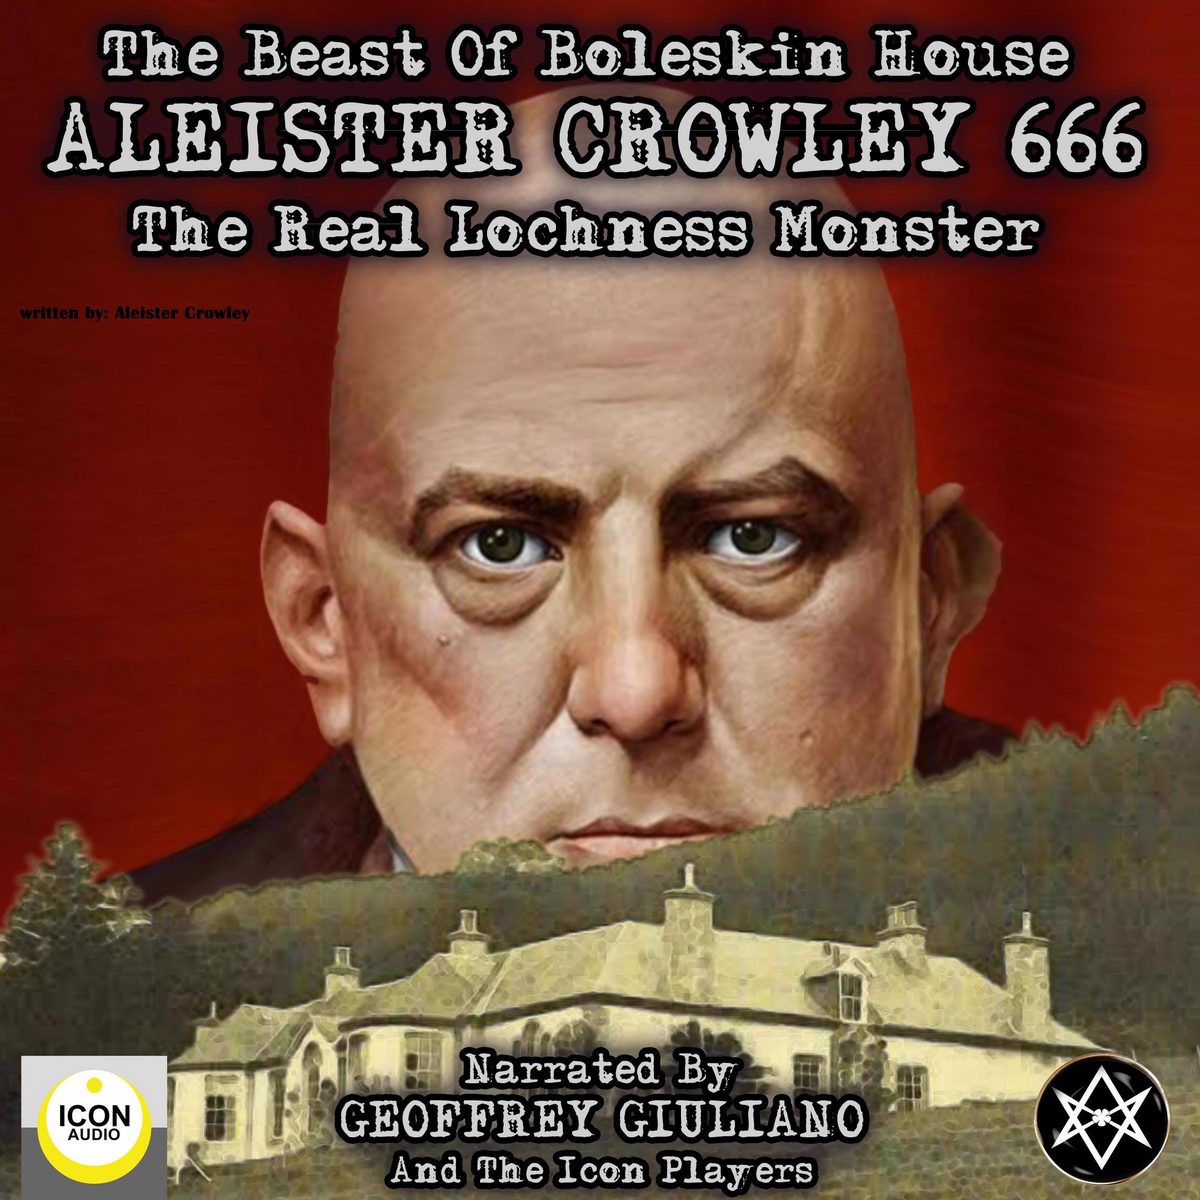 The Beast of Boleskin House; Aleister Crowley 666, The Real Lochness Monster